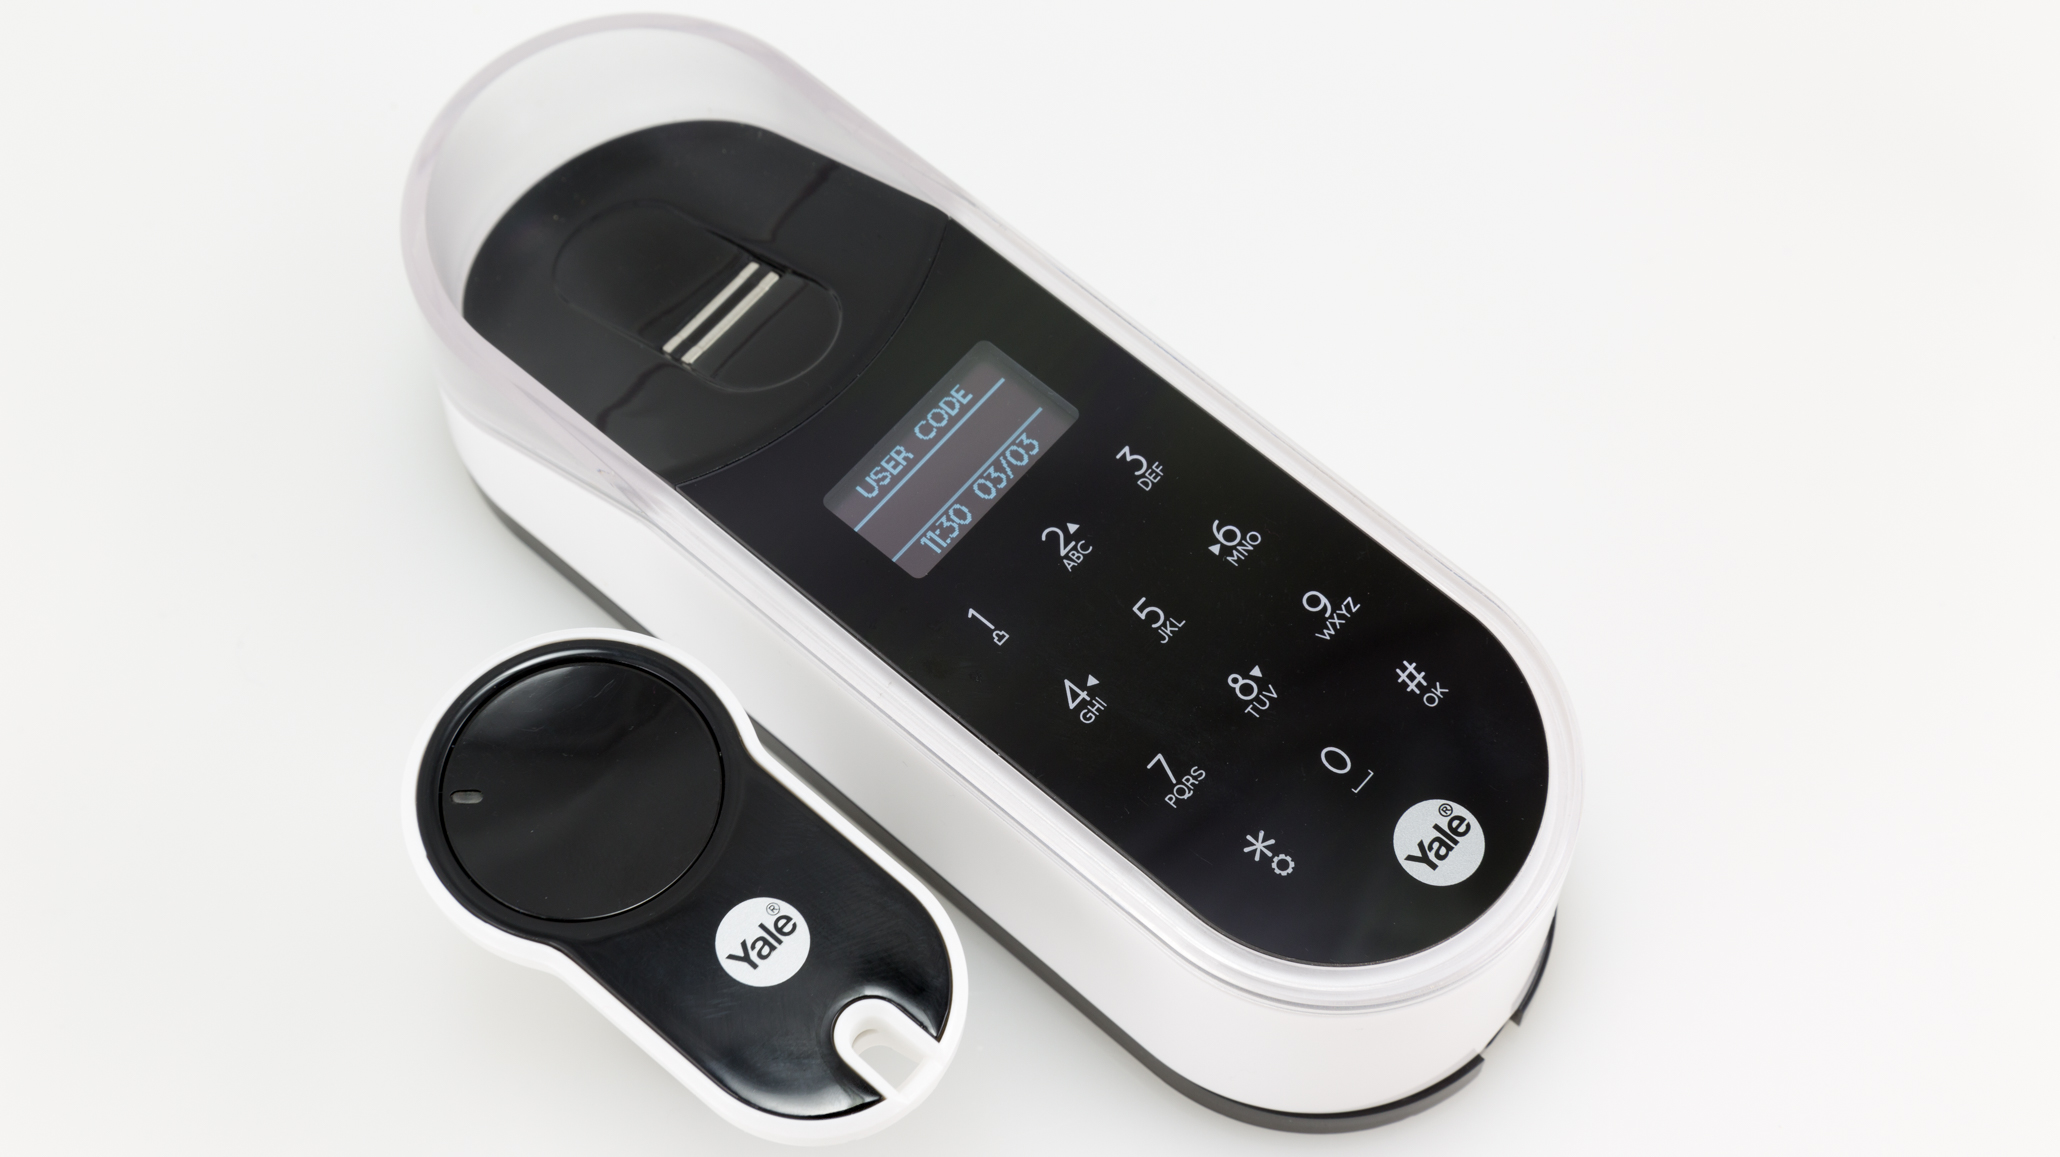 The compact ENTR remote control (left) is designed to snap onto a key ring, while the fingerprint reader (right) offers the expected biometric feature as well as a keypad for PIN code entry. Image: Digitized House Media.